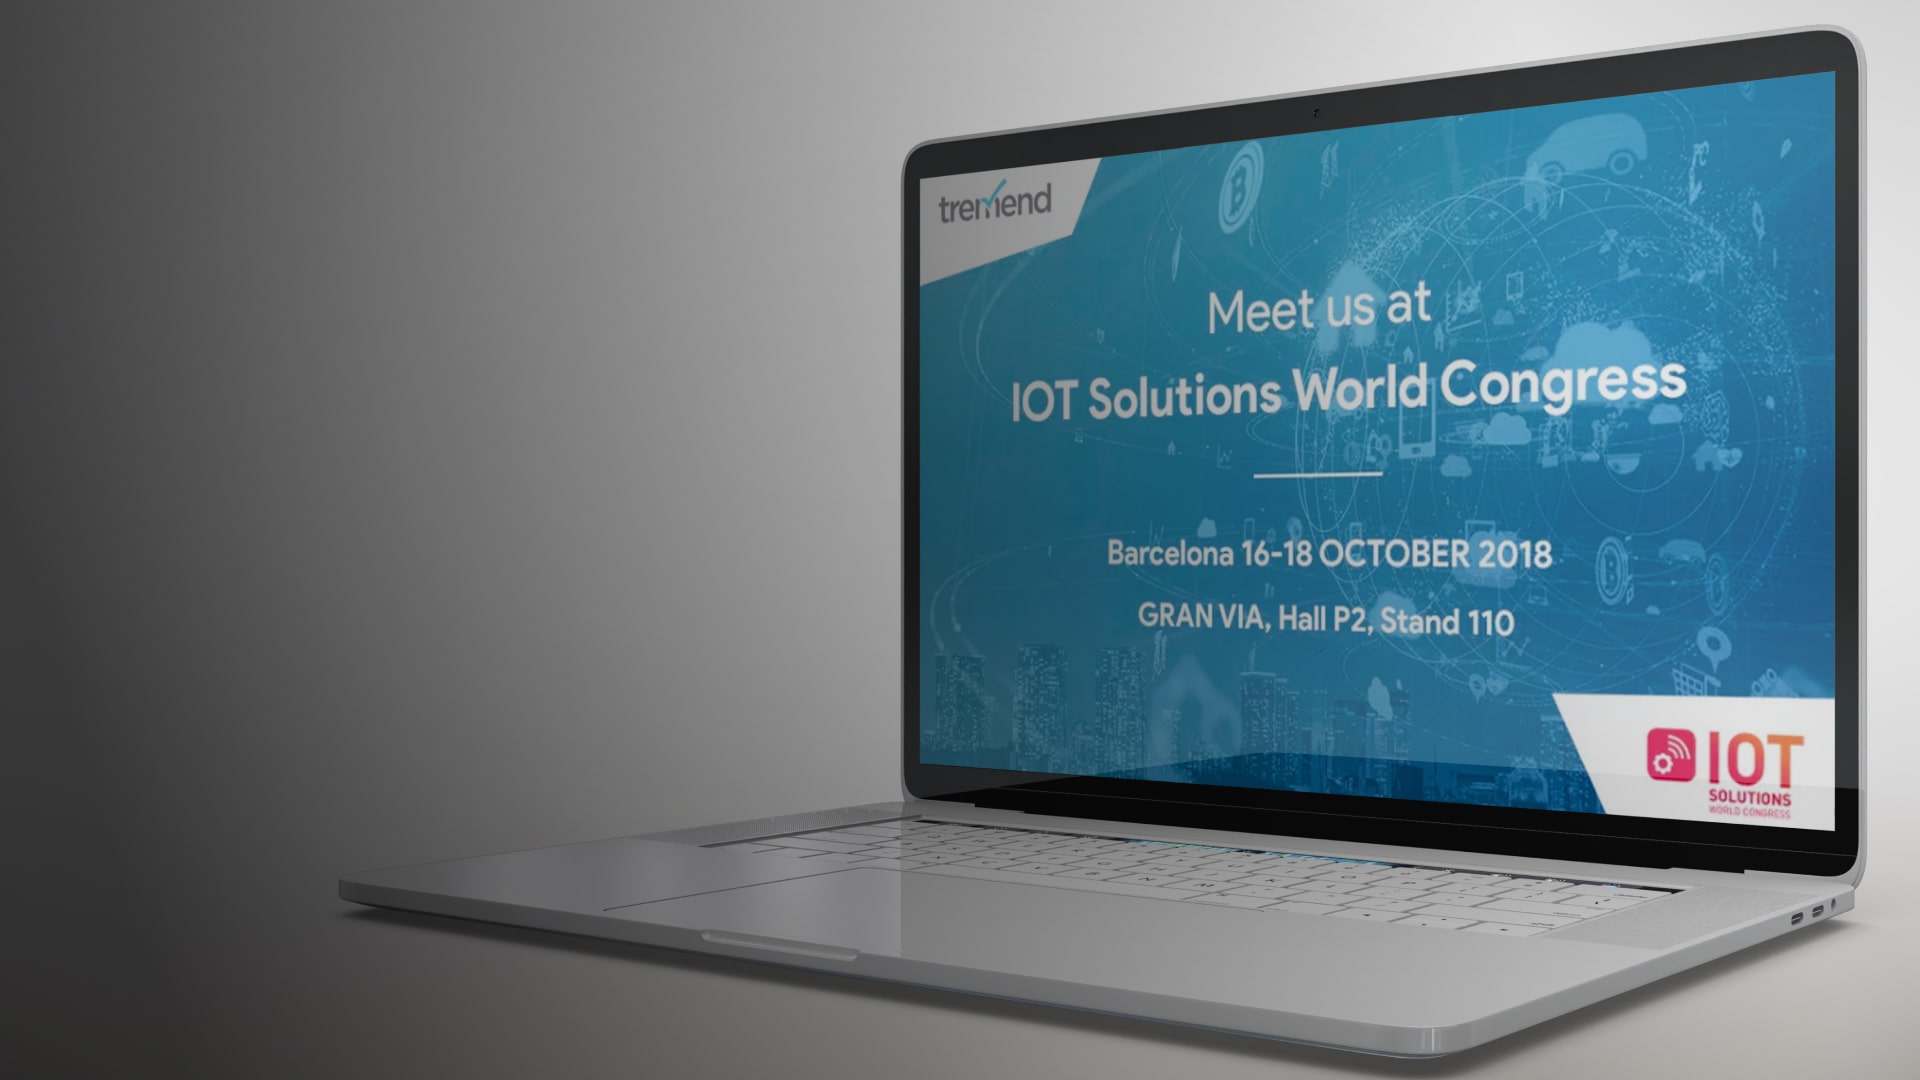 Meet our engineers at IoT Solutions World Congress